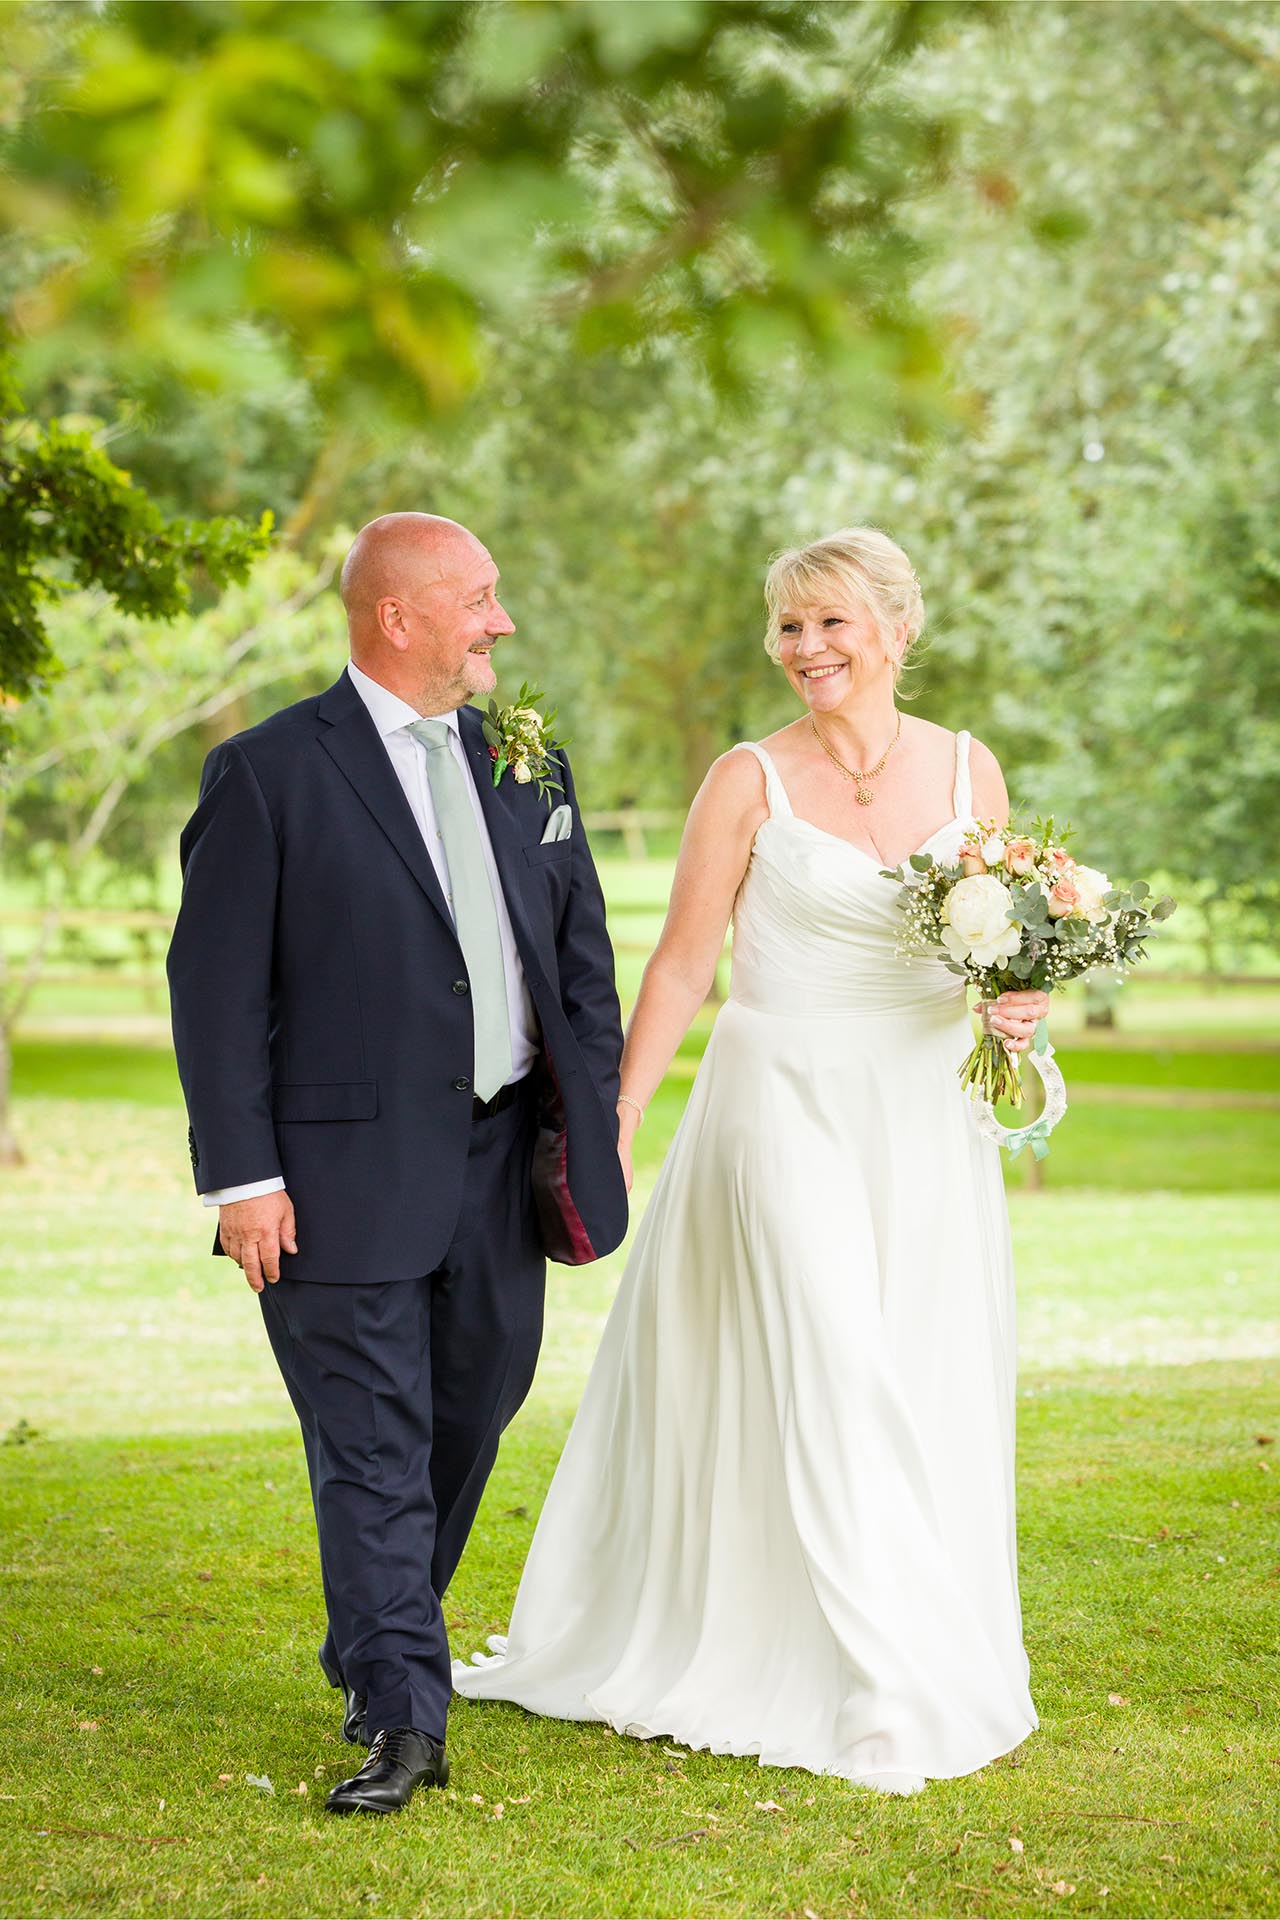 Bride and groom photograph by Essex wedding photographer at The Lawn Rochford